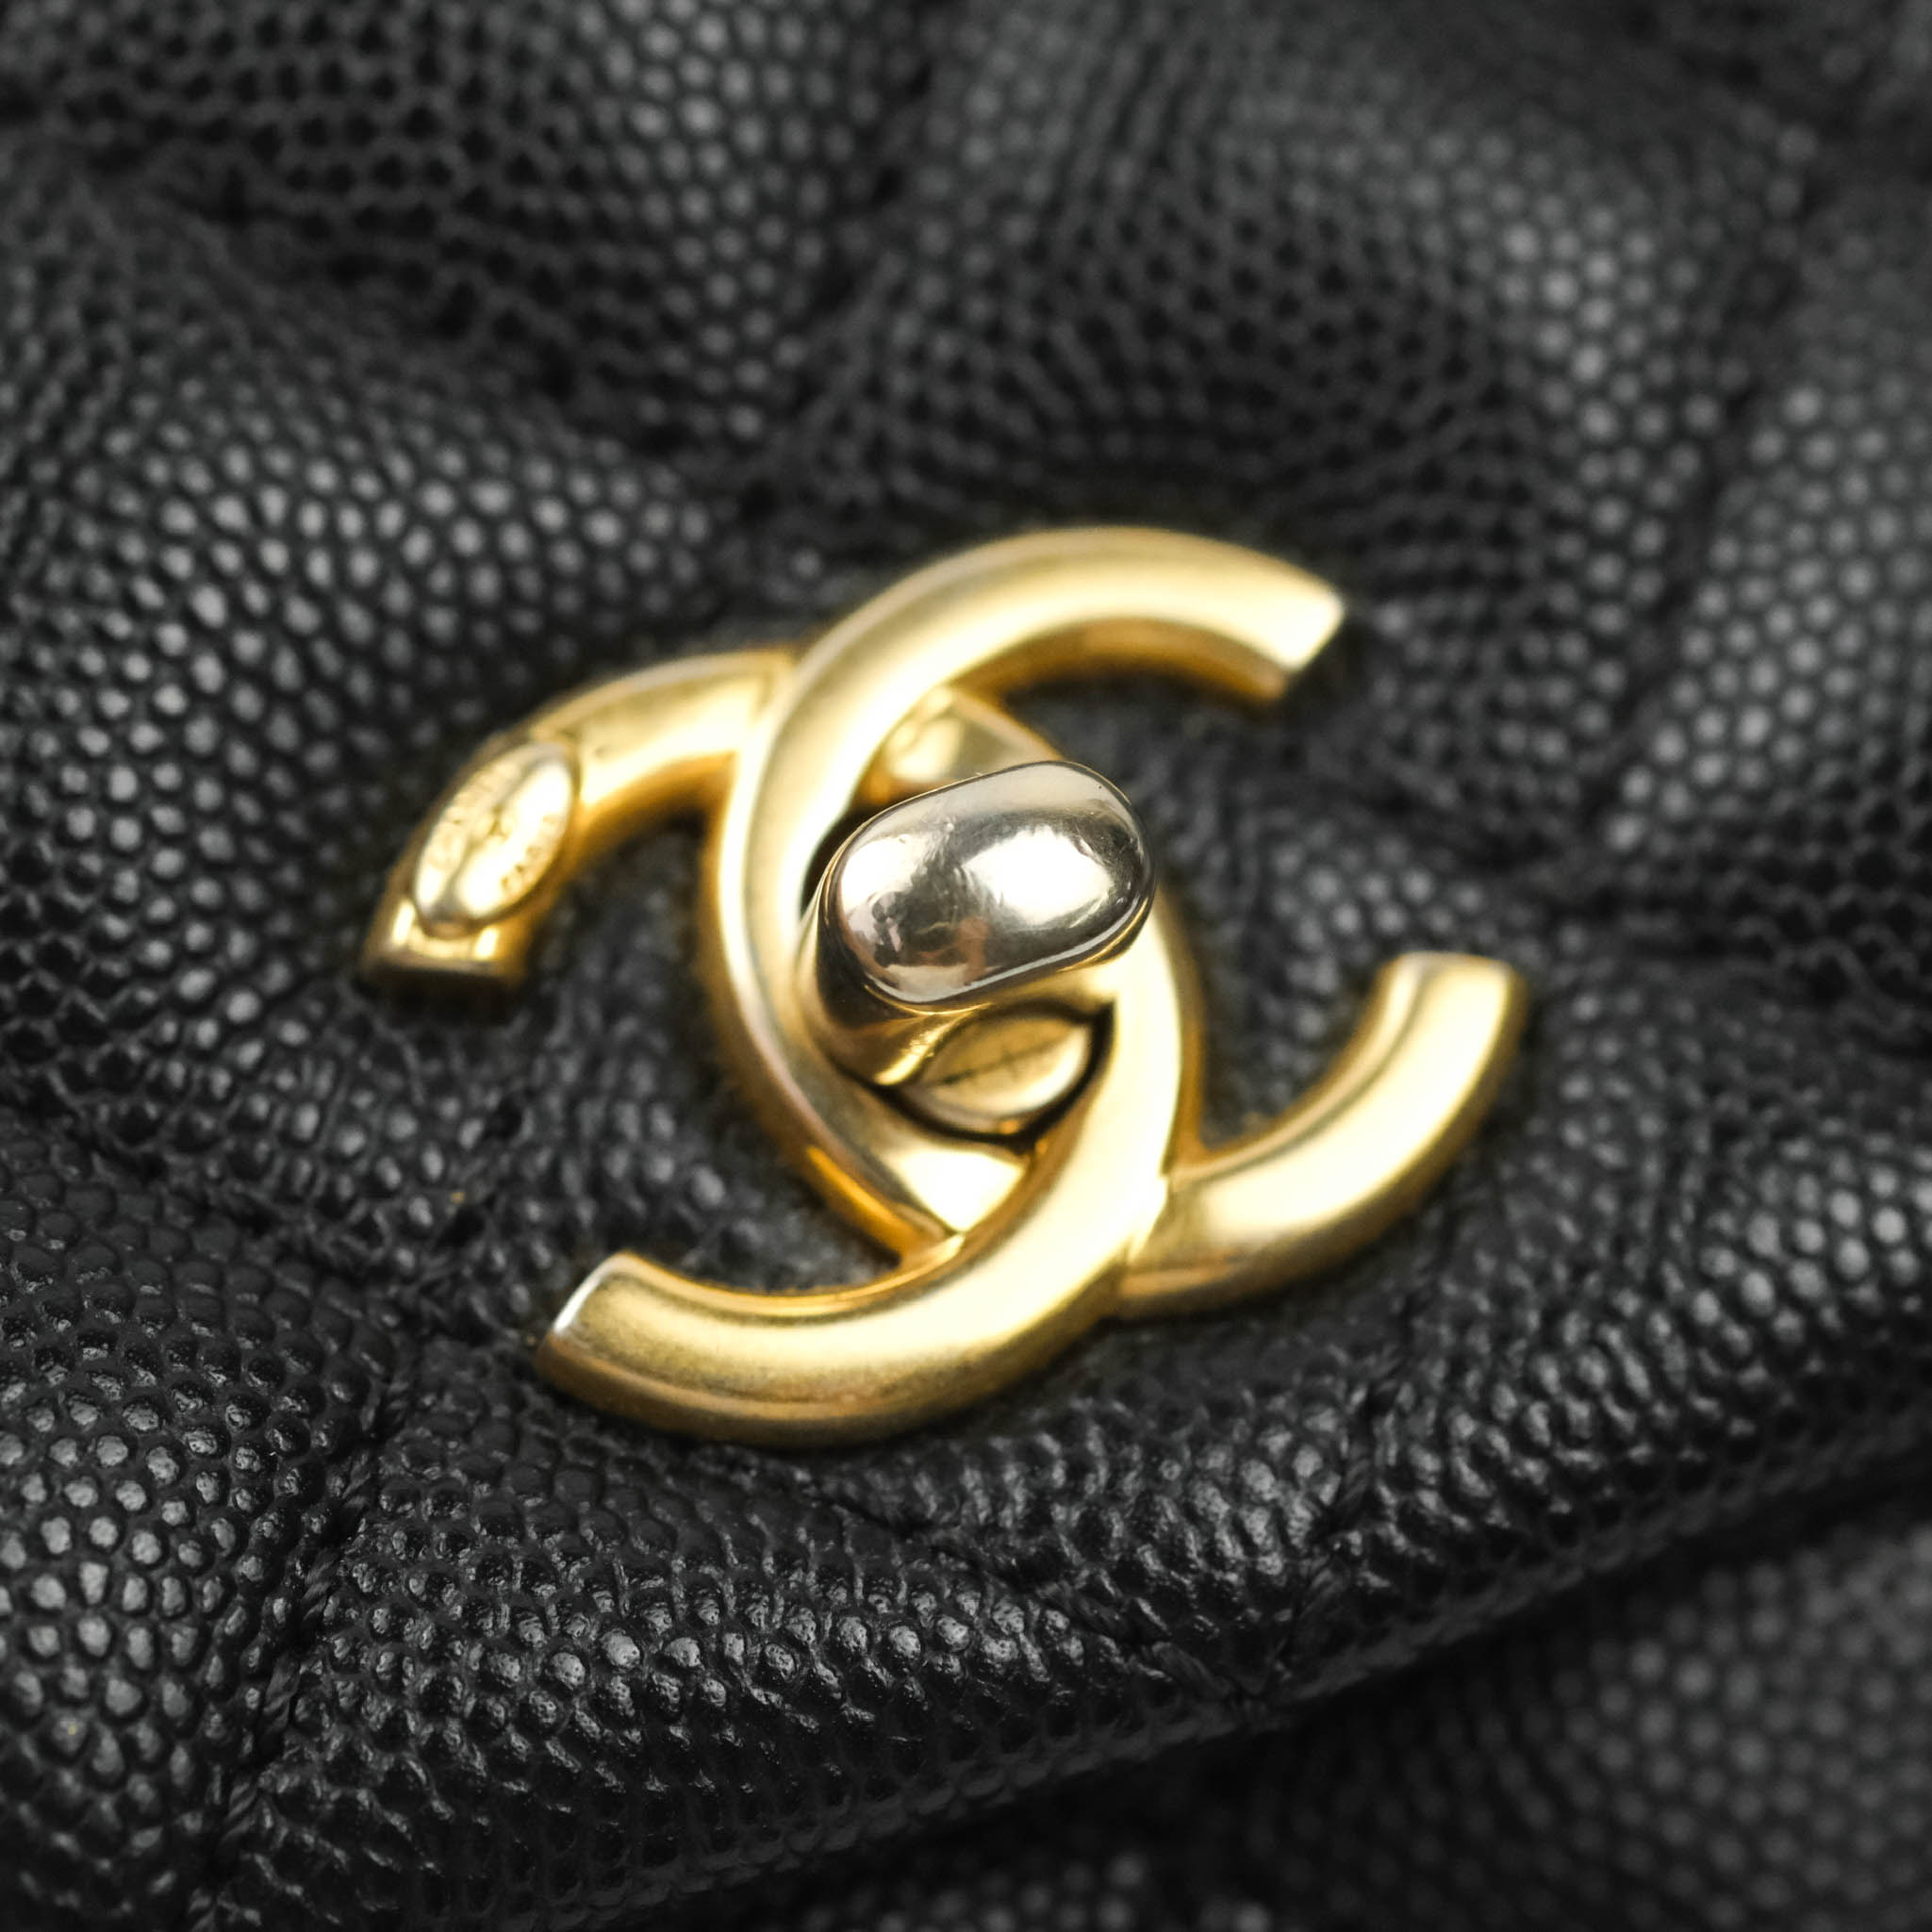 Chanel Black Quilted Caviar Small Double Flap Bag Gold Hardware – Madison  Avenue Couture